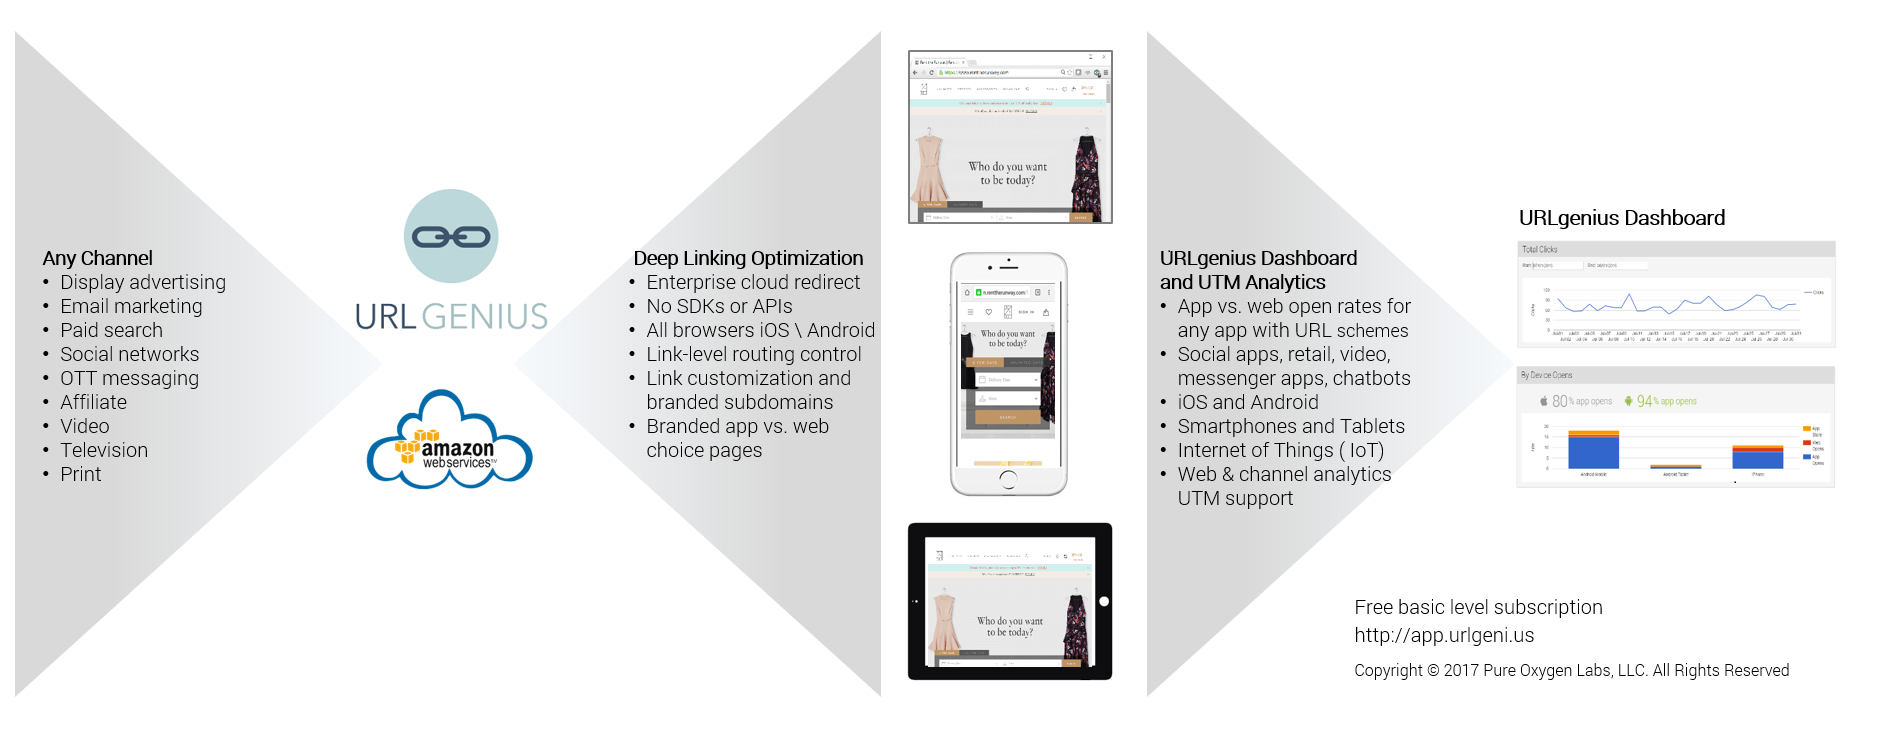 Mobile App Deep Linking on the Cloud with URLgenius